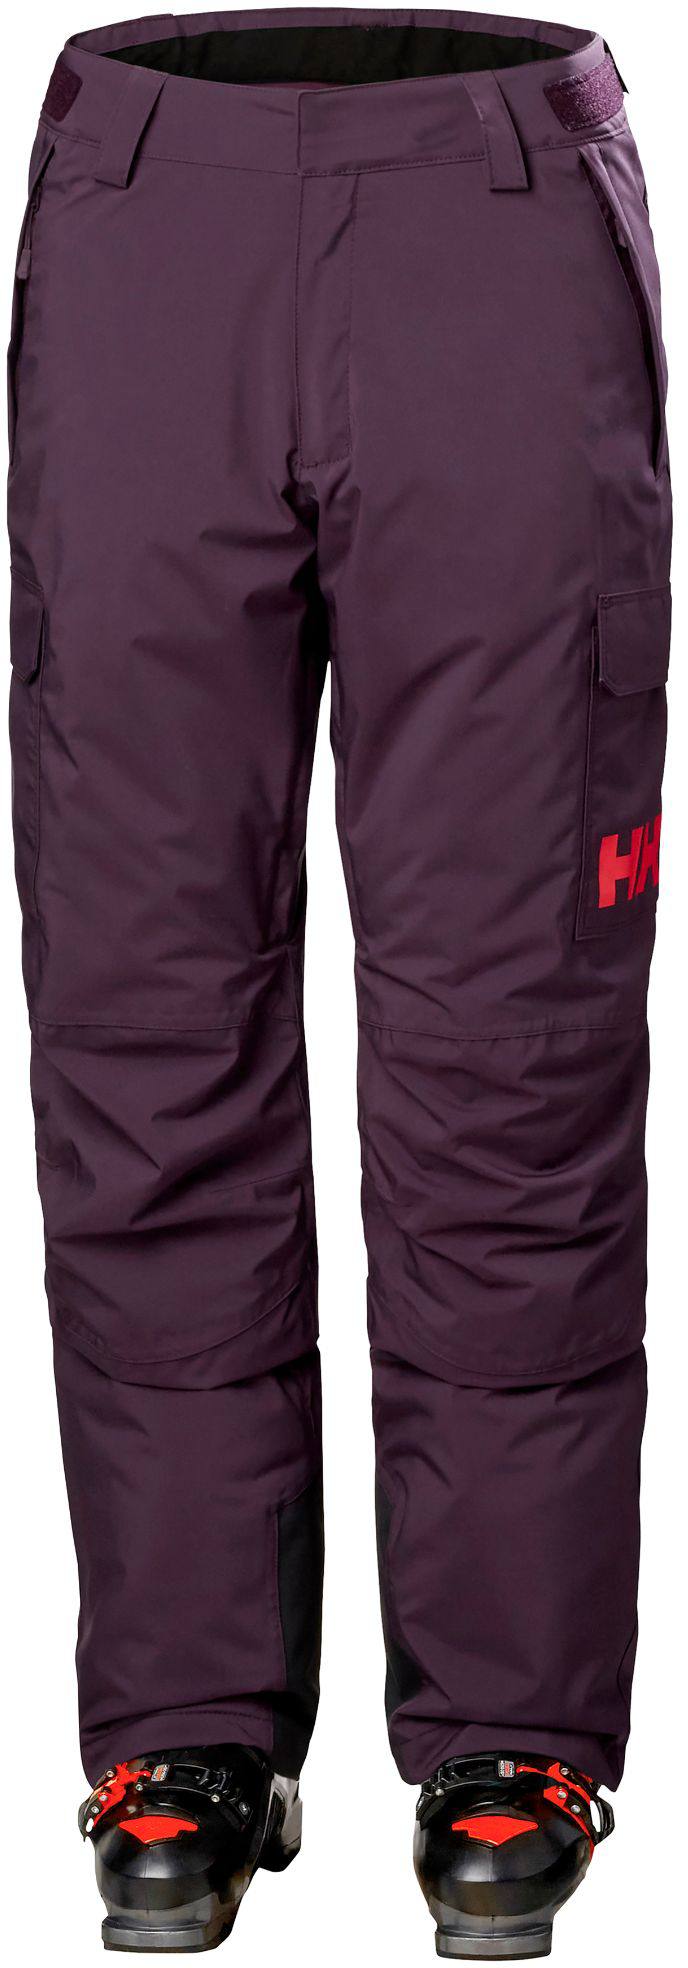 Women’s Switch Cargo Insulated Pant Amethyst L